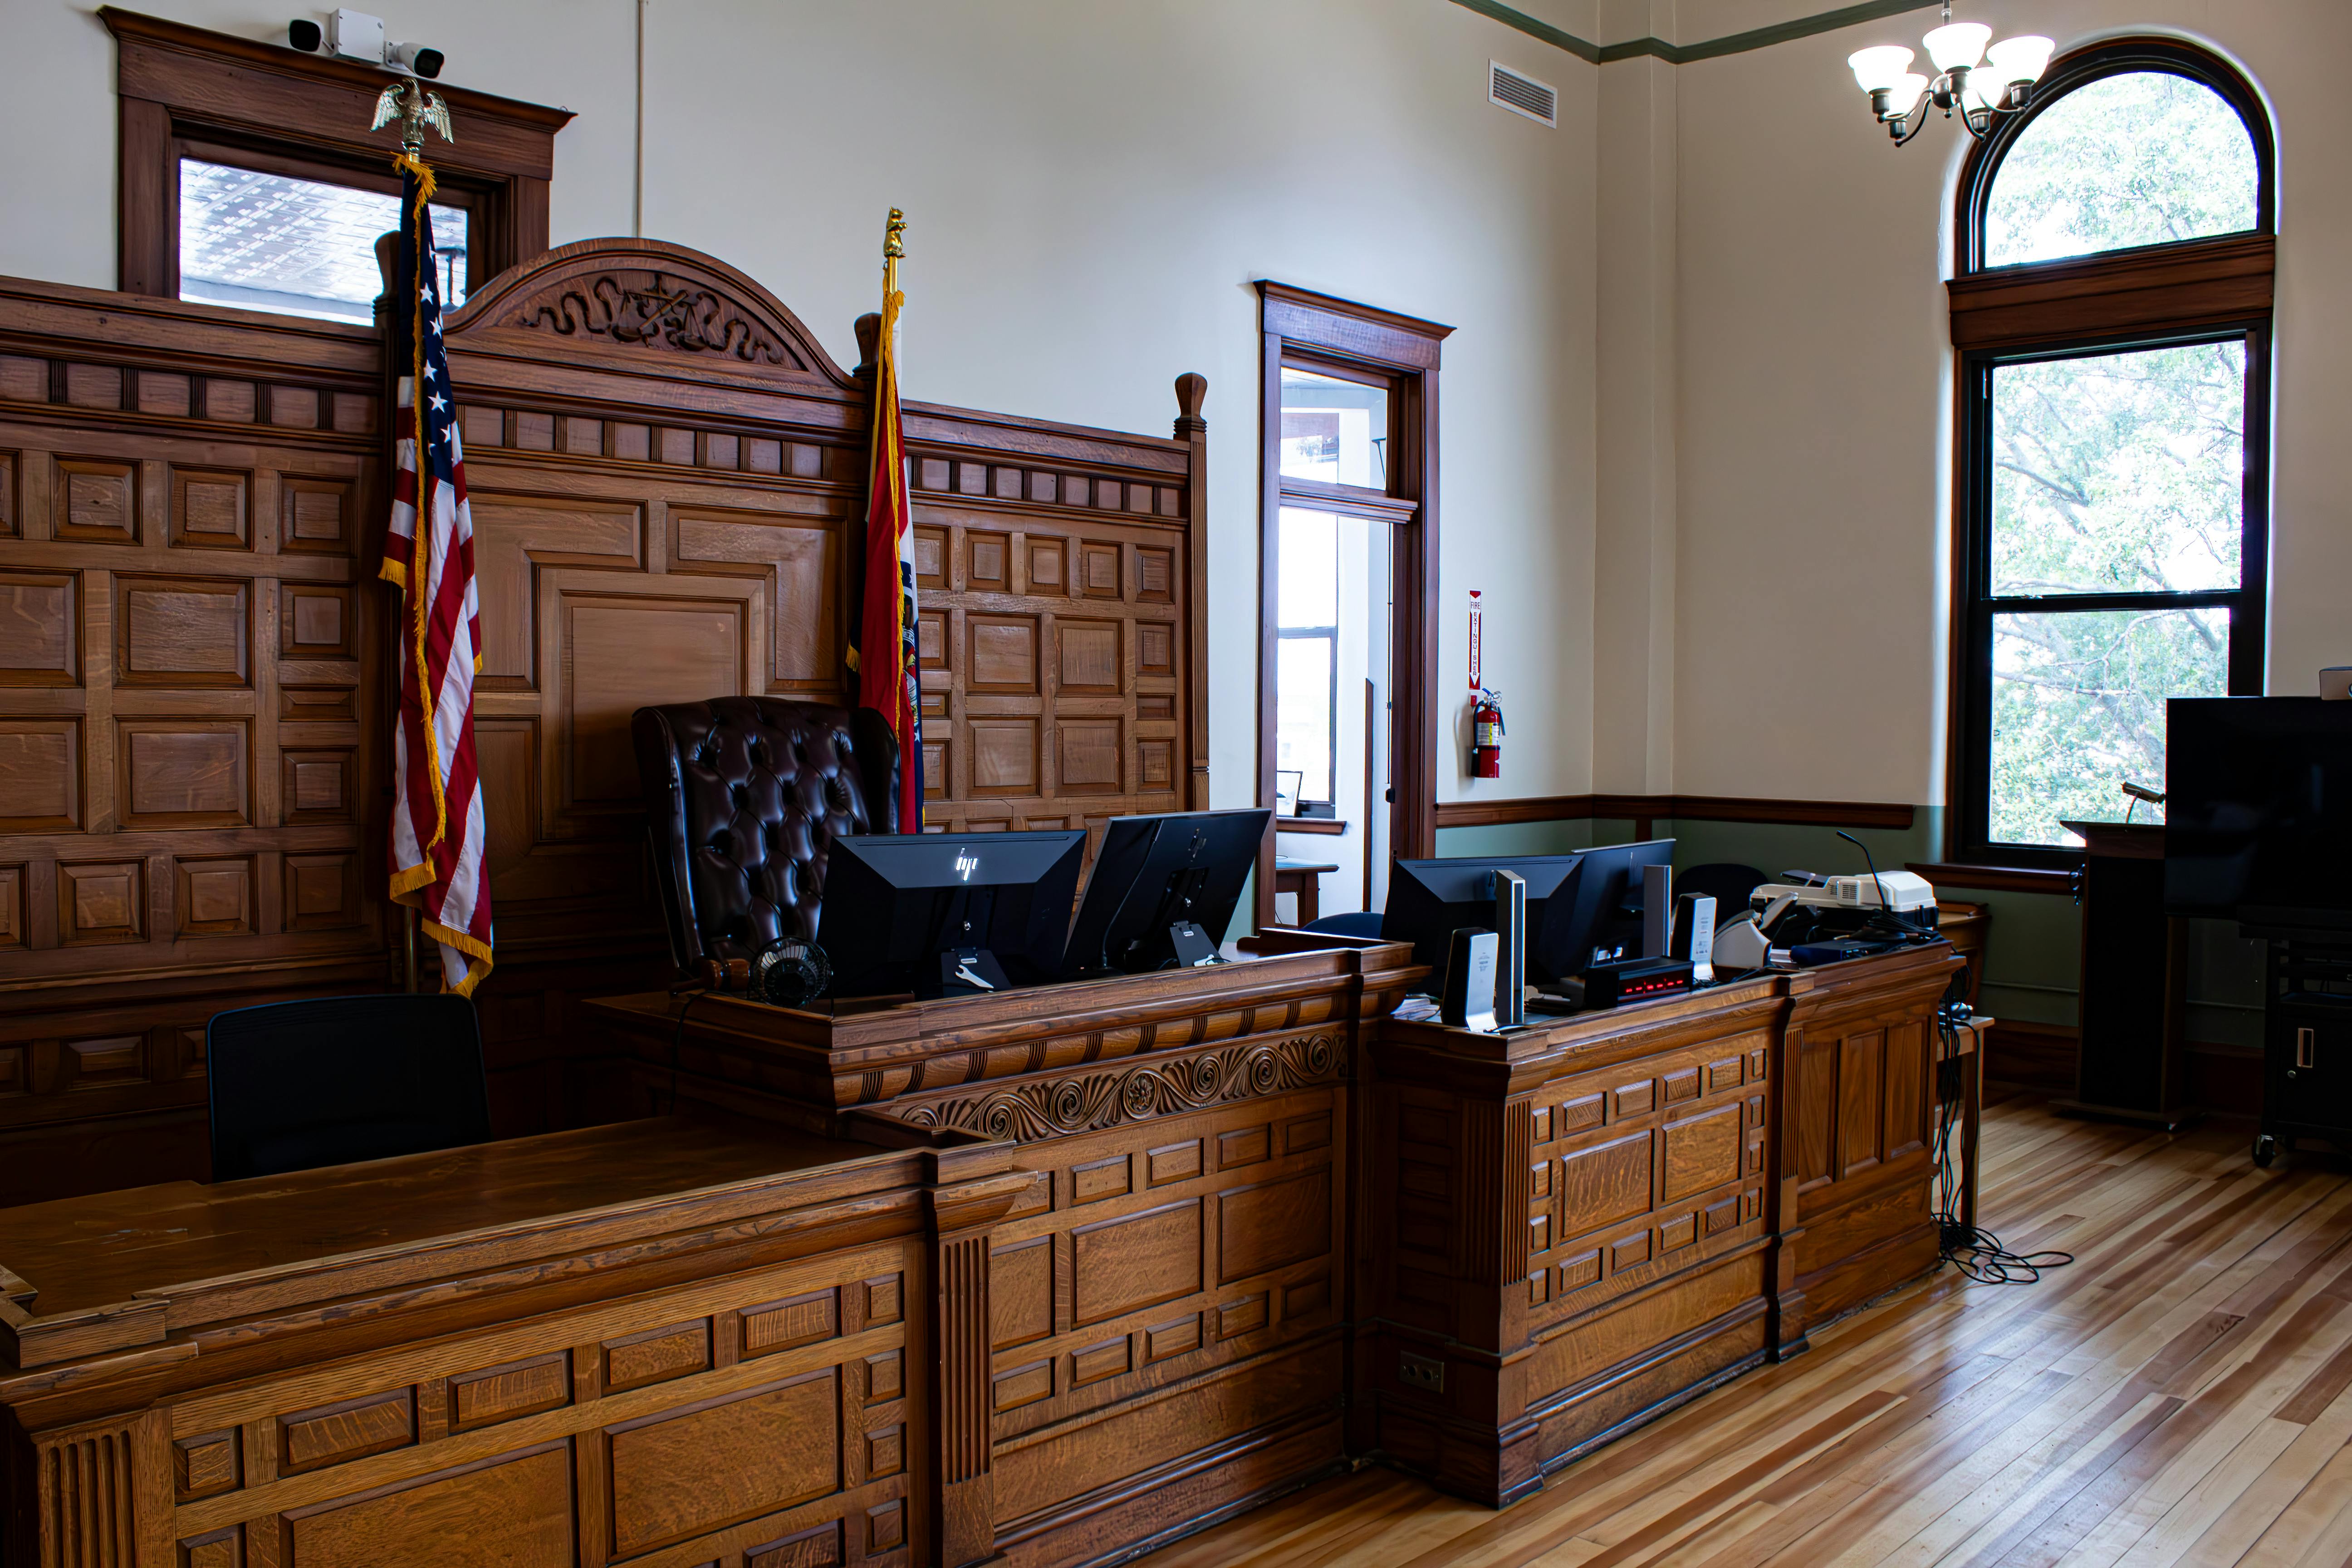 A courtroom with American flags | Source: Pexels